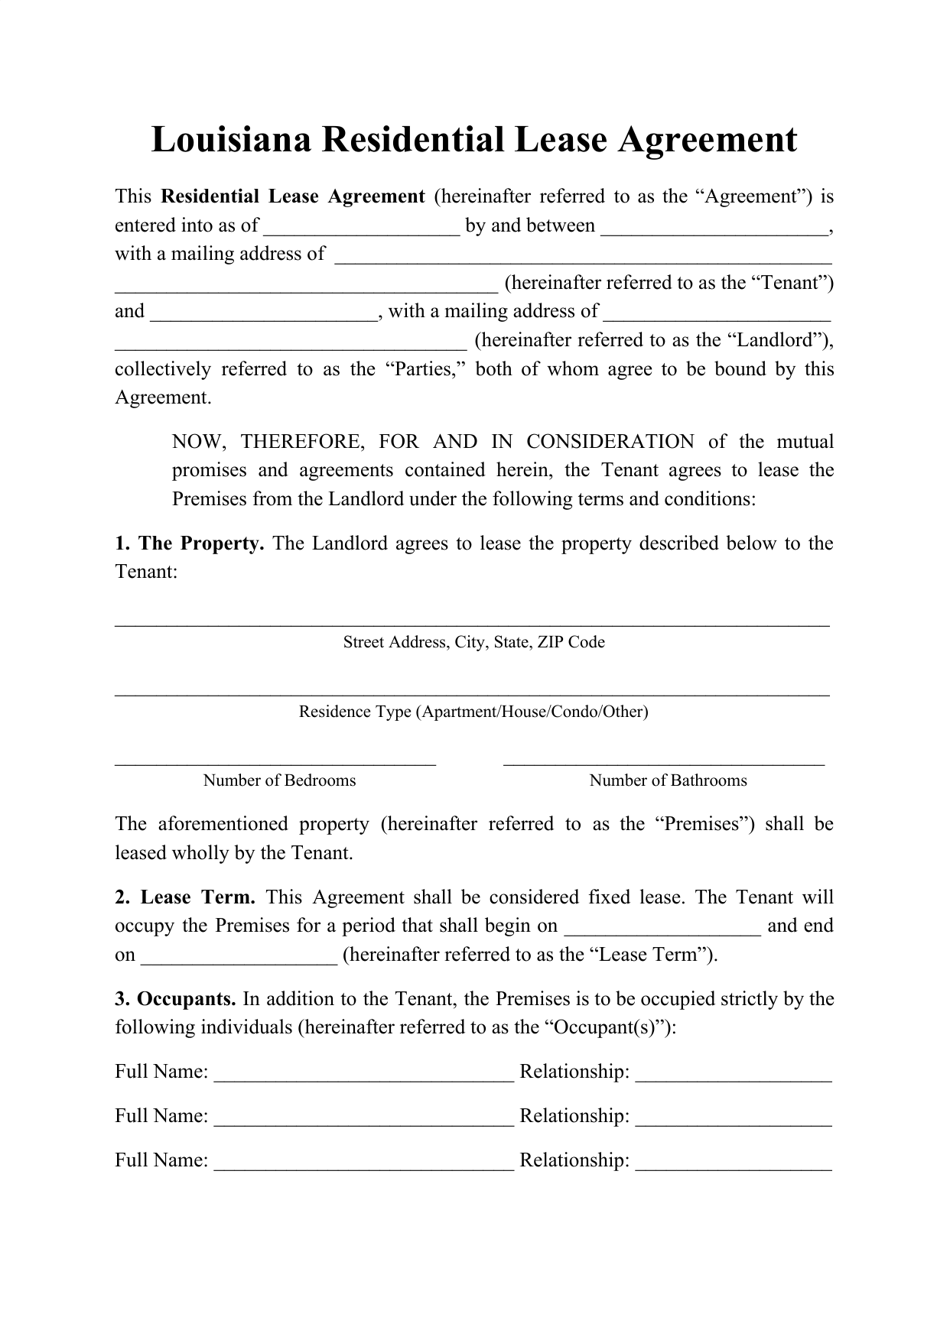 Residential Lease Agreement Template - Louisiana, Page 1